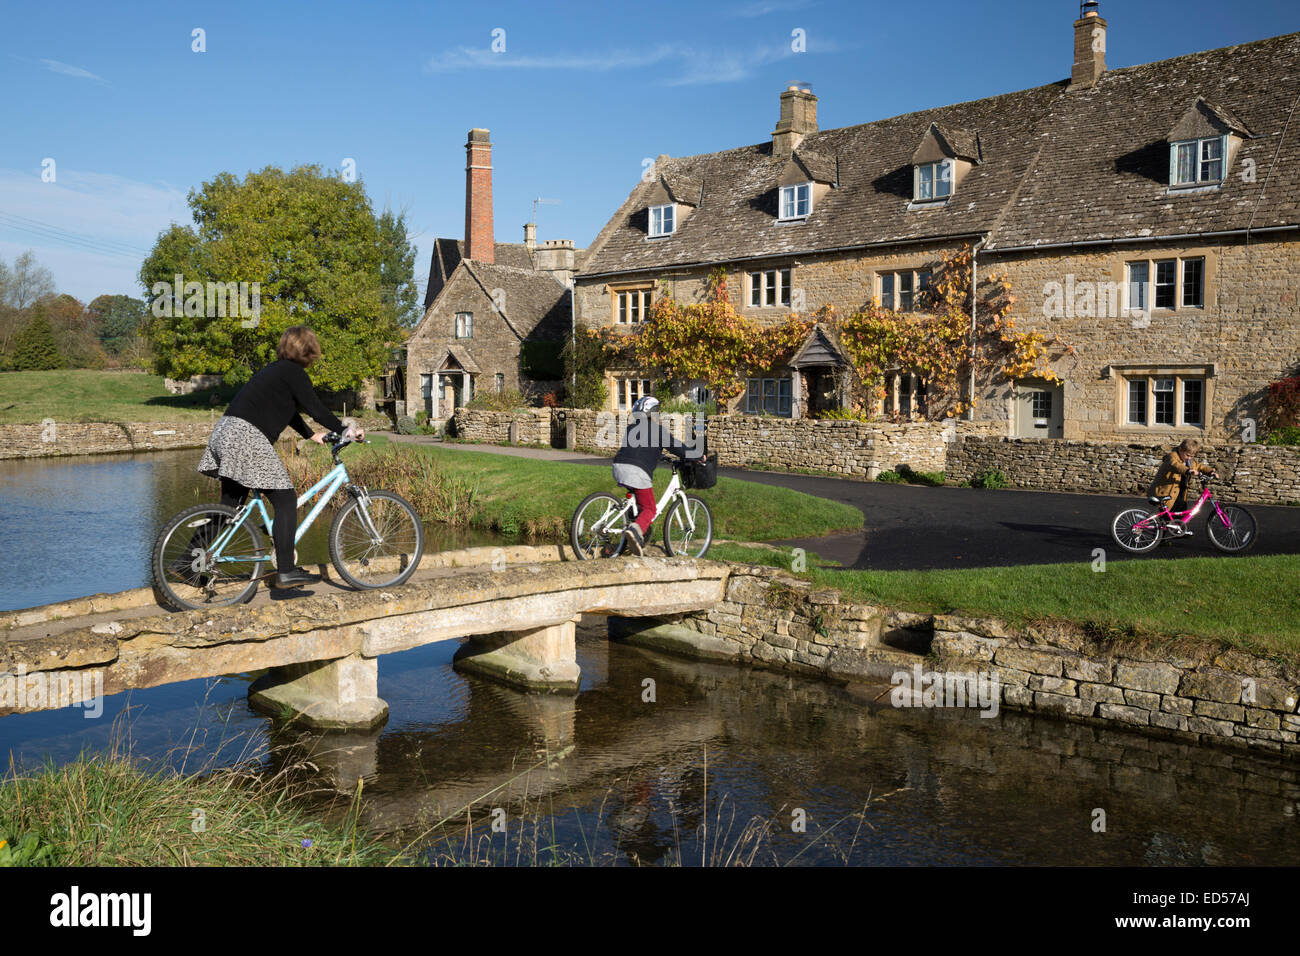 Stone bridge and Cotswold stone cottages on the River Eye, Lower Slaughter, Cotswolds, Gloucestershire, England, United Kingdom, Europe Stock Photo